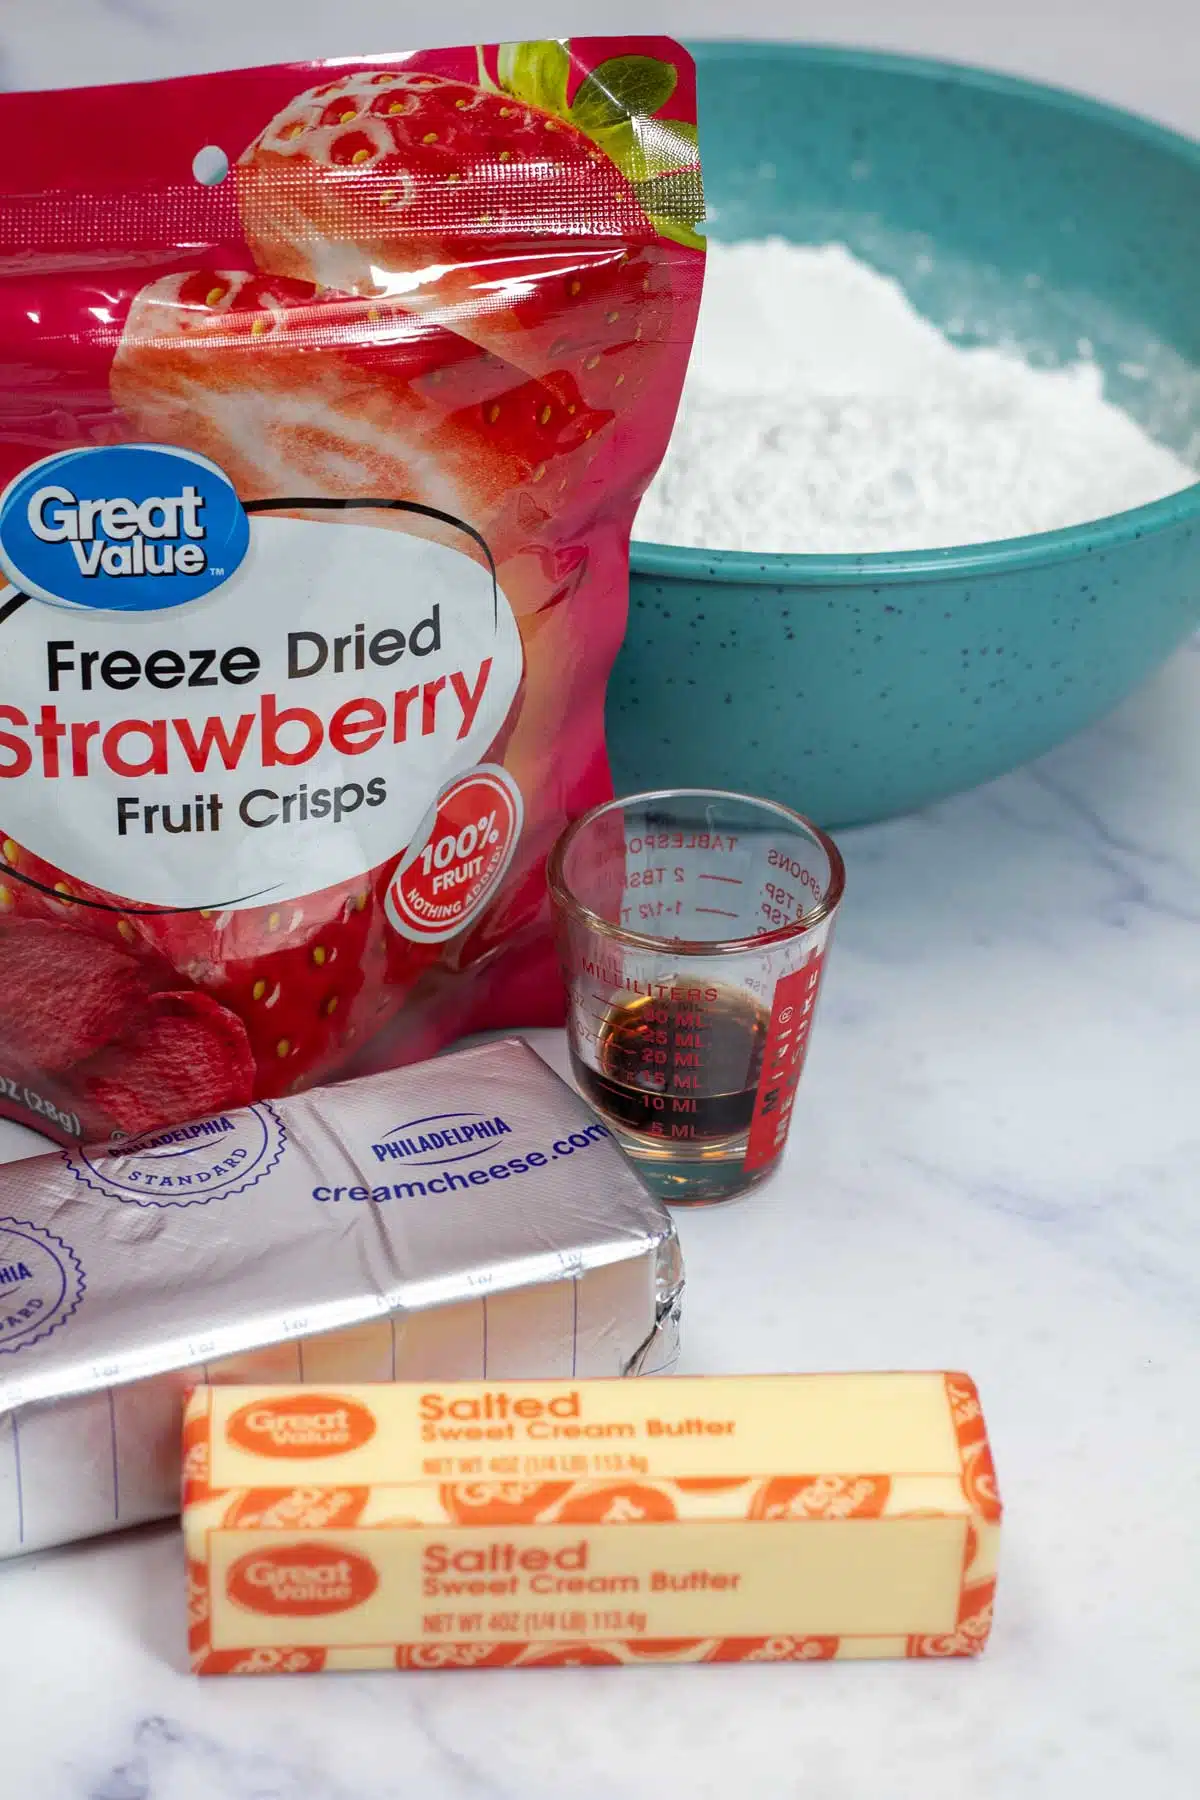 Tall image showing strawberry cream cheese ingredients.